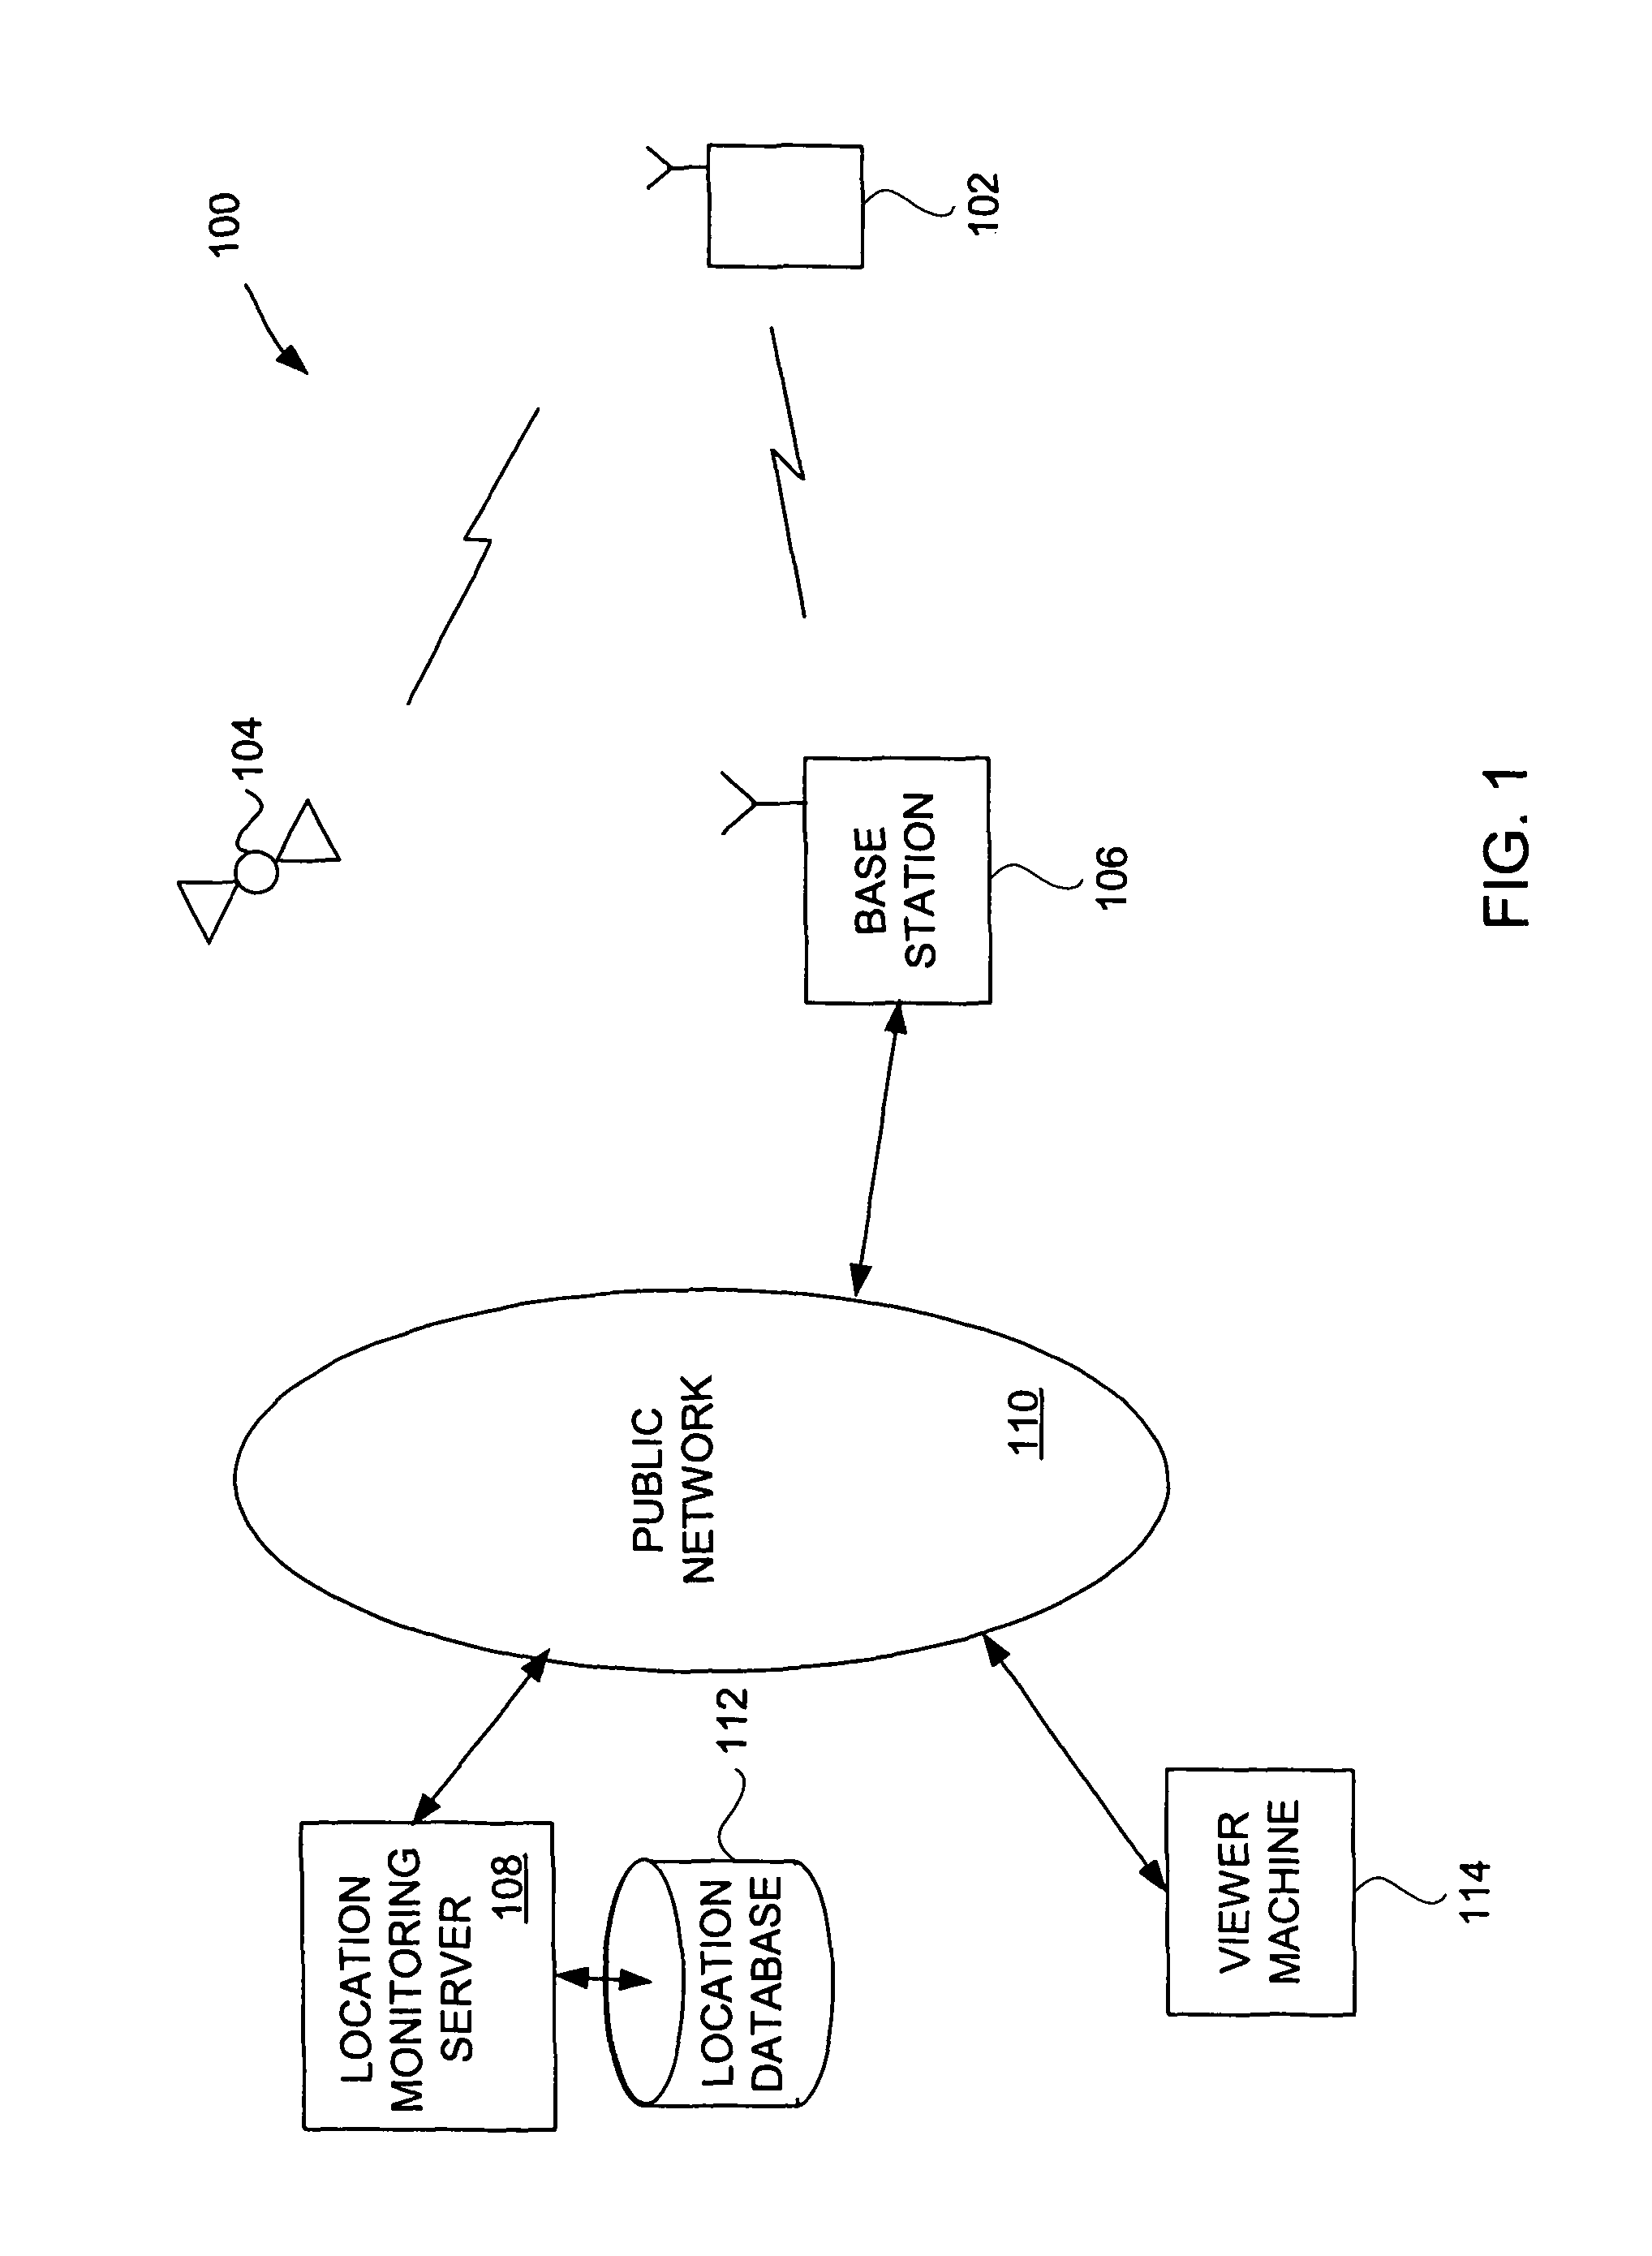 Method and apparatus for intelligent acquisition of position information